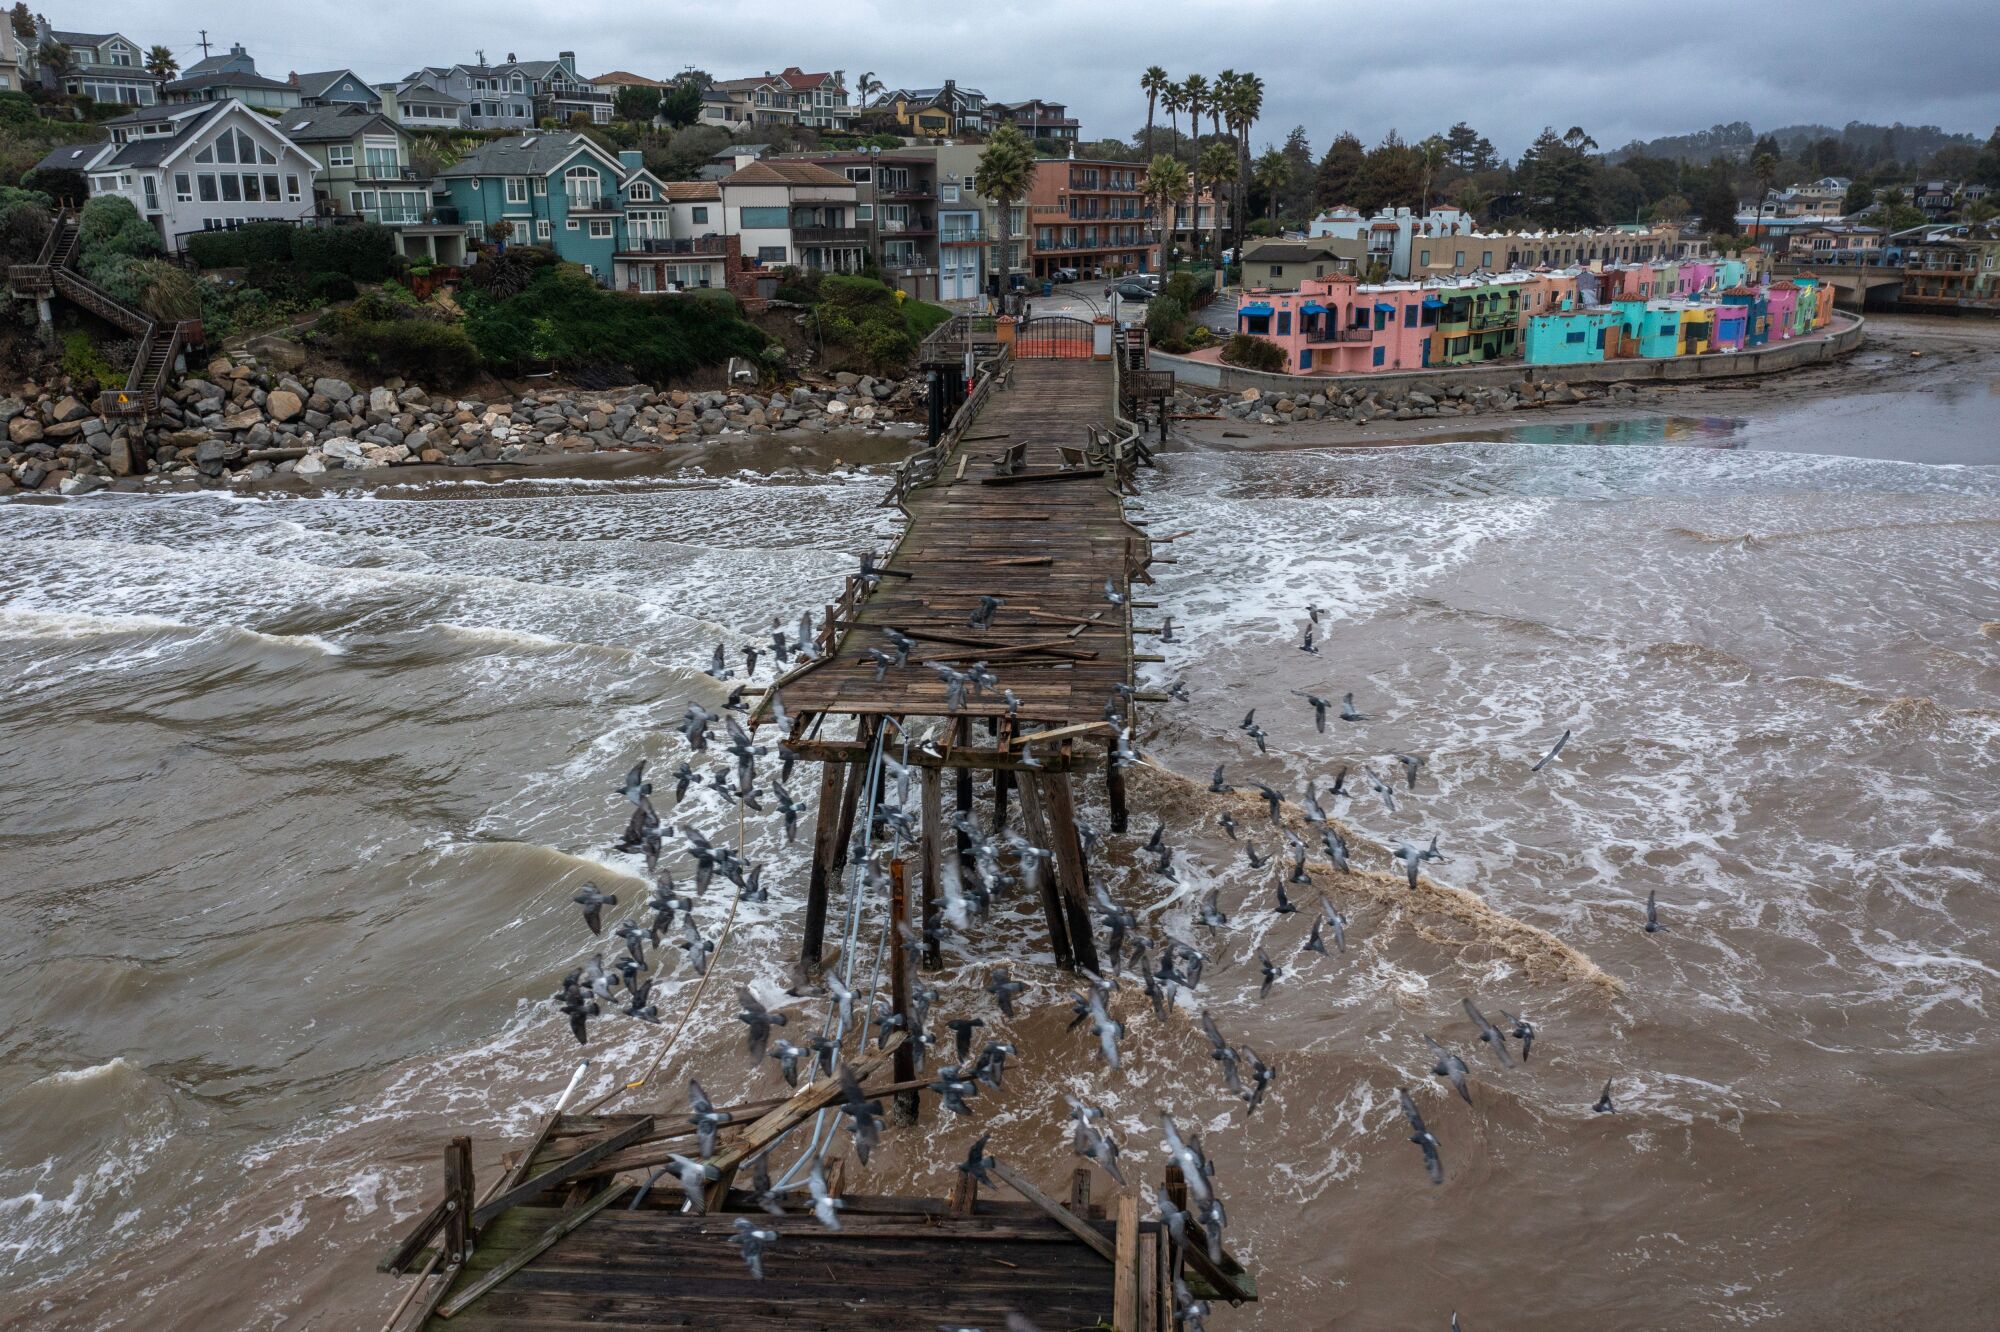 This aerial view shows the Capitola Pier, built in 1857, damaged after recent storms in Capitola.